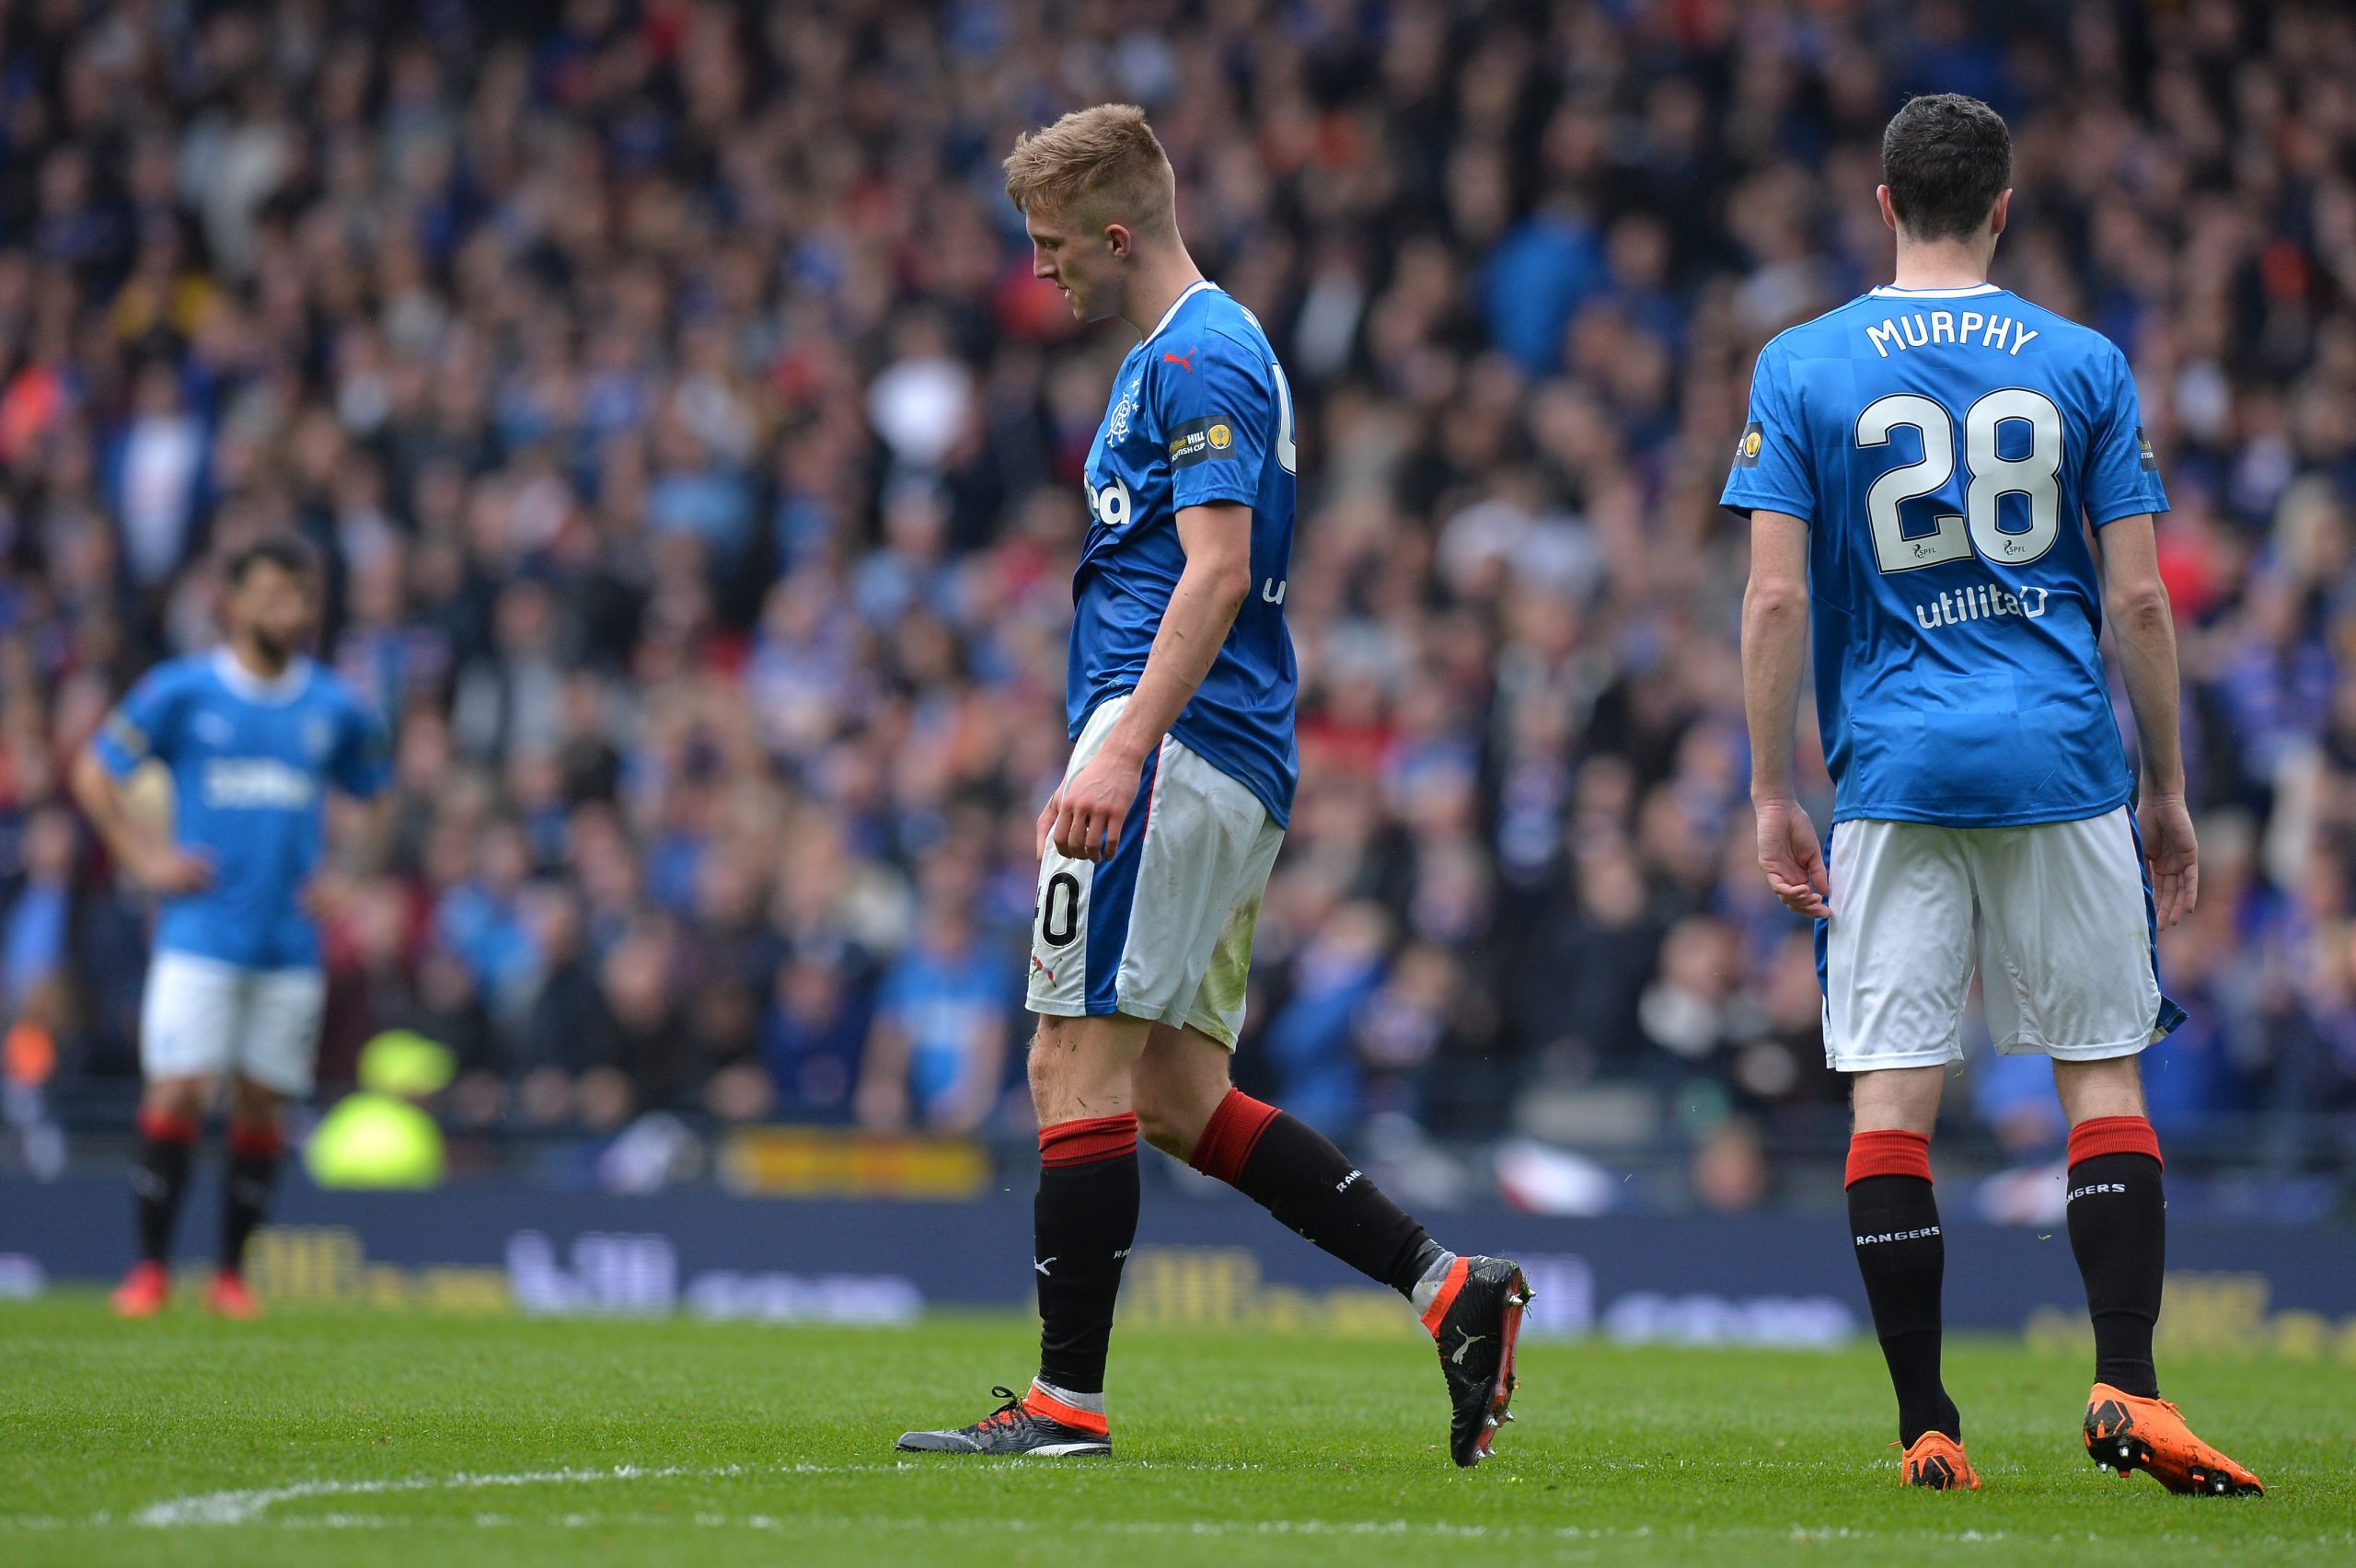 GLASGOW, SCOTLAND - APRIL 15:  Ross McCrorie of Rangers walks off after being sent off during the Scottish Cup Semi Final match between Rangers and Celtic at Hampden Park on April 15, 2018 in Glasgow, Scotland.  (Photo by Mark Runnacles/Getty Images)